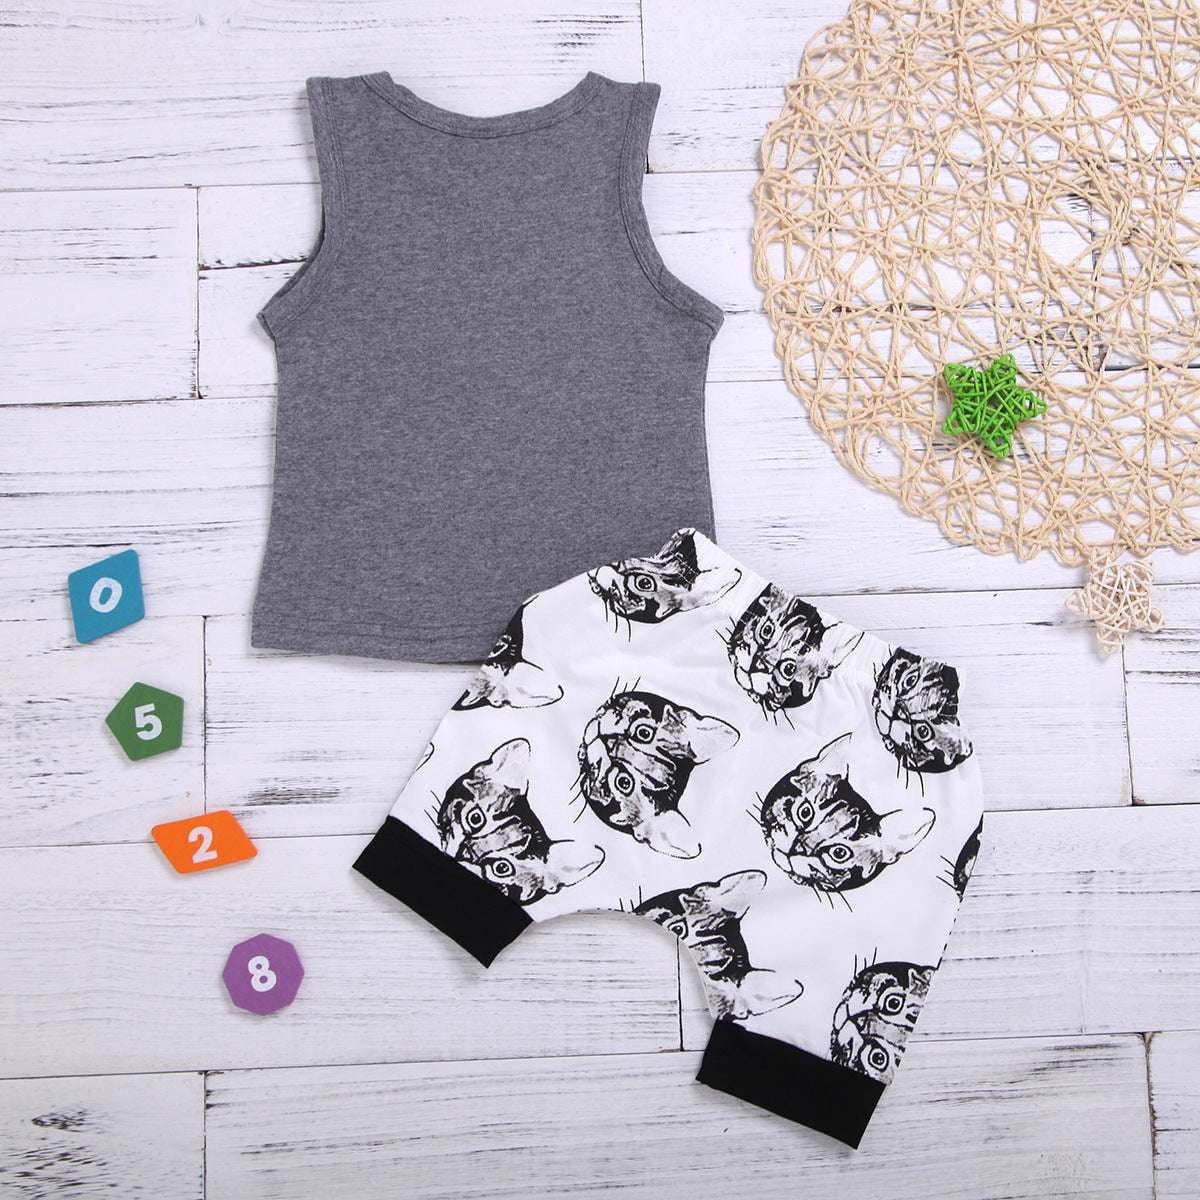 Cat Print Bottoms, Kids Cotton Outfit, Printed Sleeveless Top - available at Sparq Mart